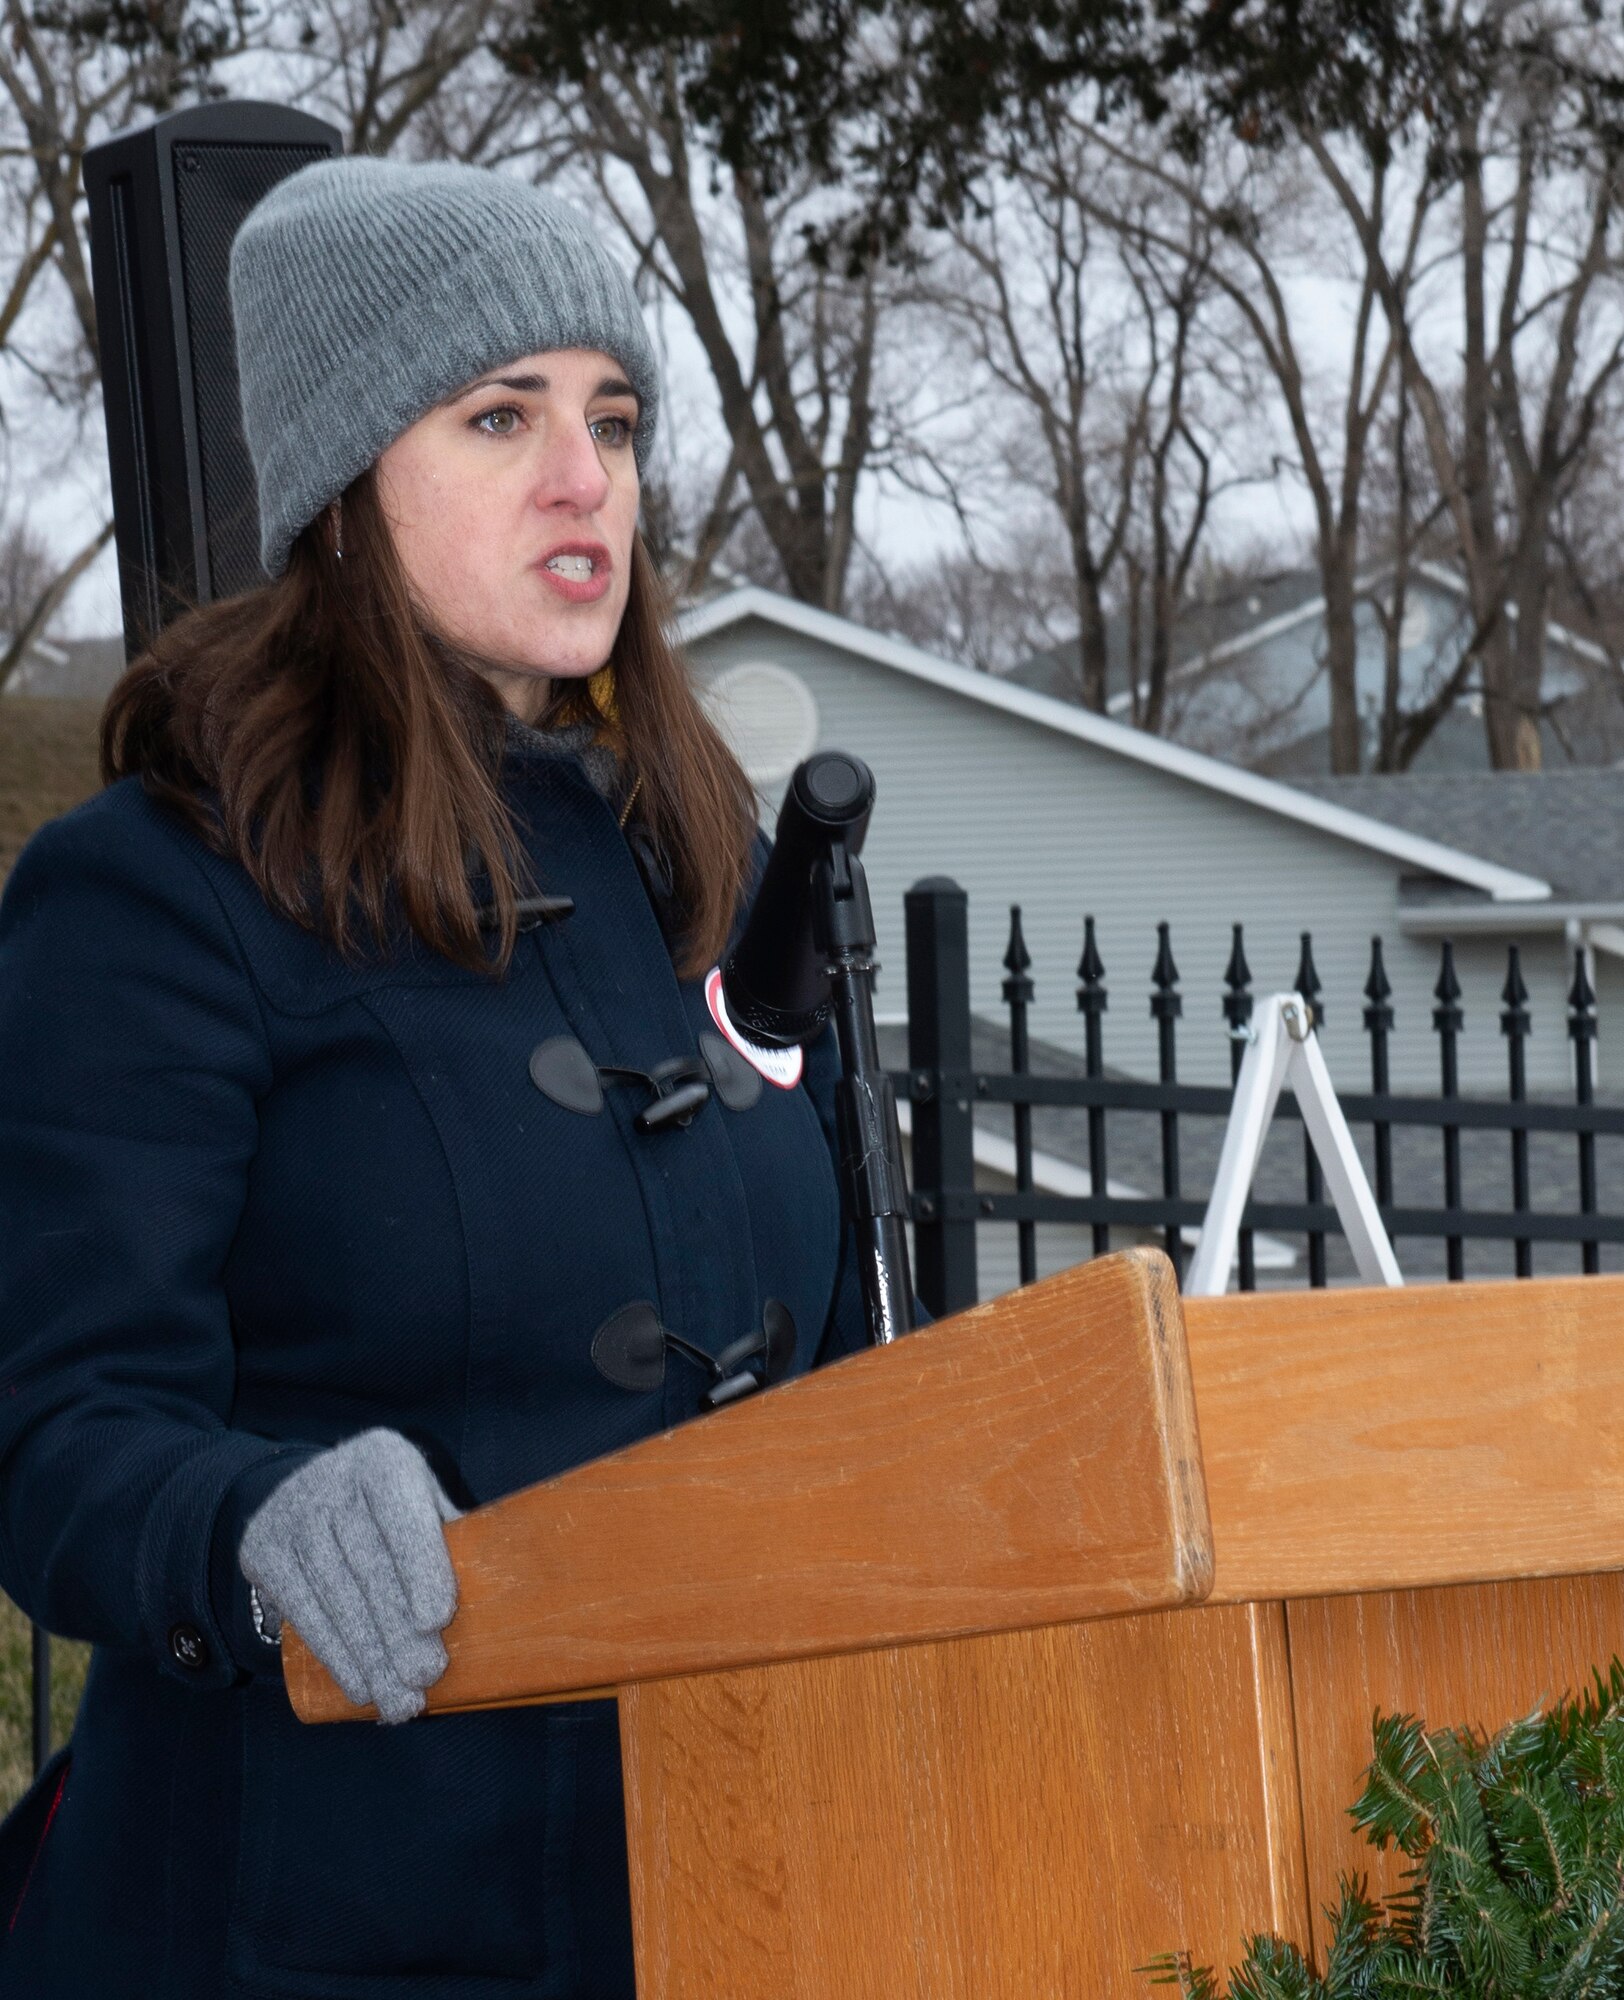 Christine Stewart, Offutt Officer’s Spouses Club co-chair, speaks during a National Wreaths Across America Ceremony at Offutt Air Force Base, Neb., Dec. 14, 2019. The WAA is a non-profit organization that lays wreaths at more than 1,200 veteran cemeteries across the country and overseas on National Wreath Day.